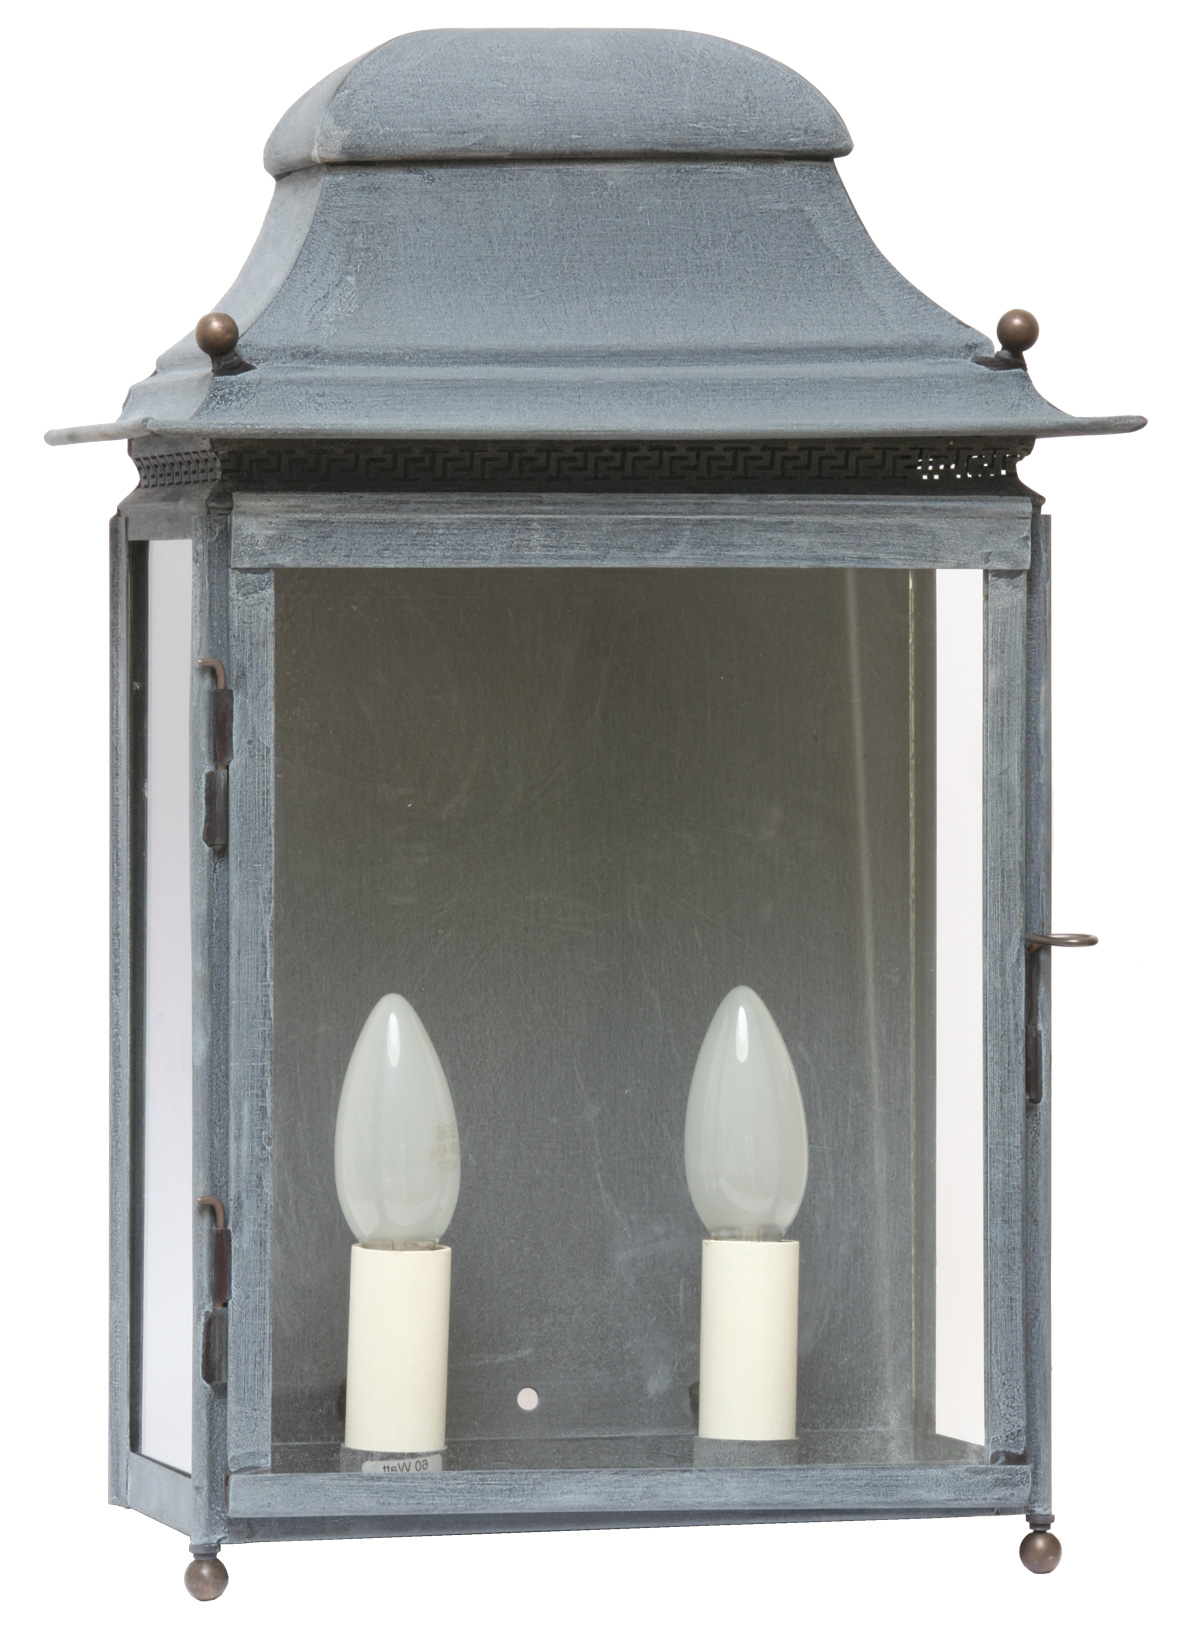 Historical French Outdoor Wall Lighting Chantilly